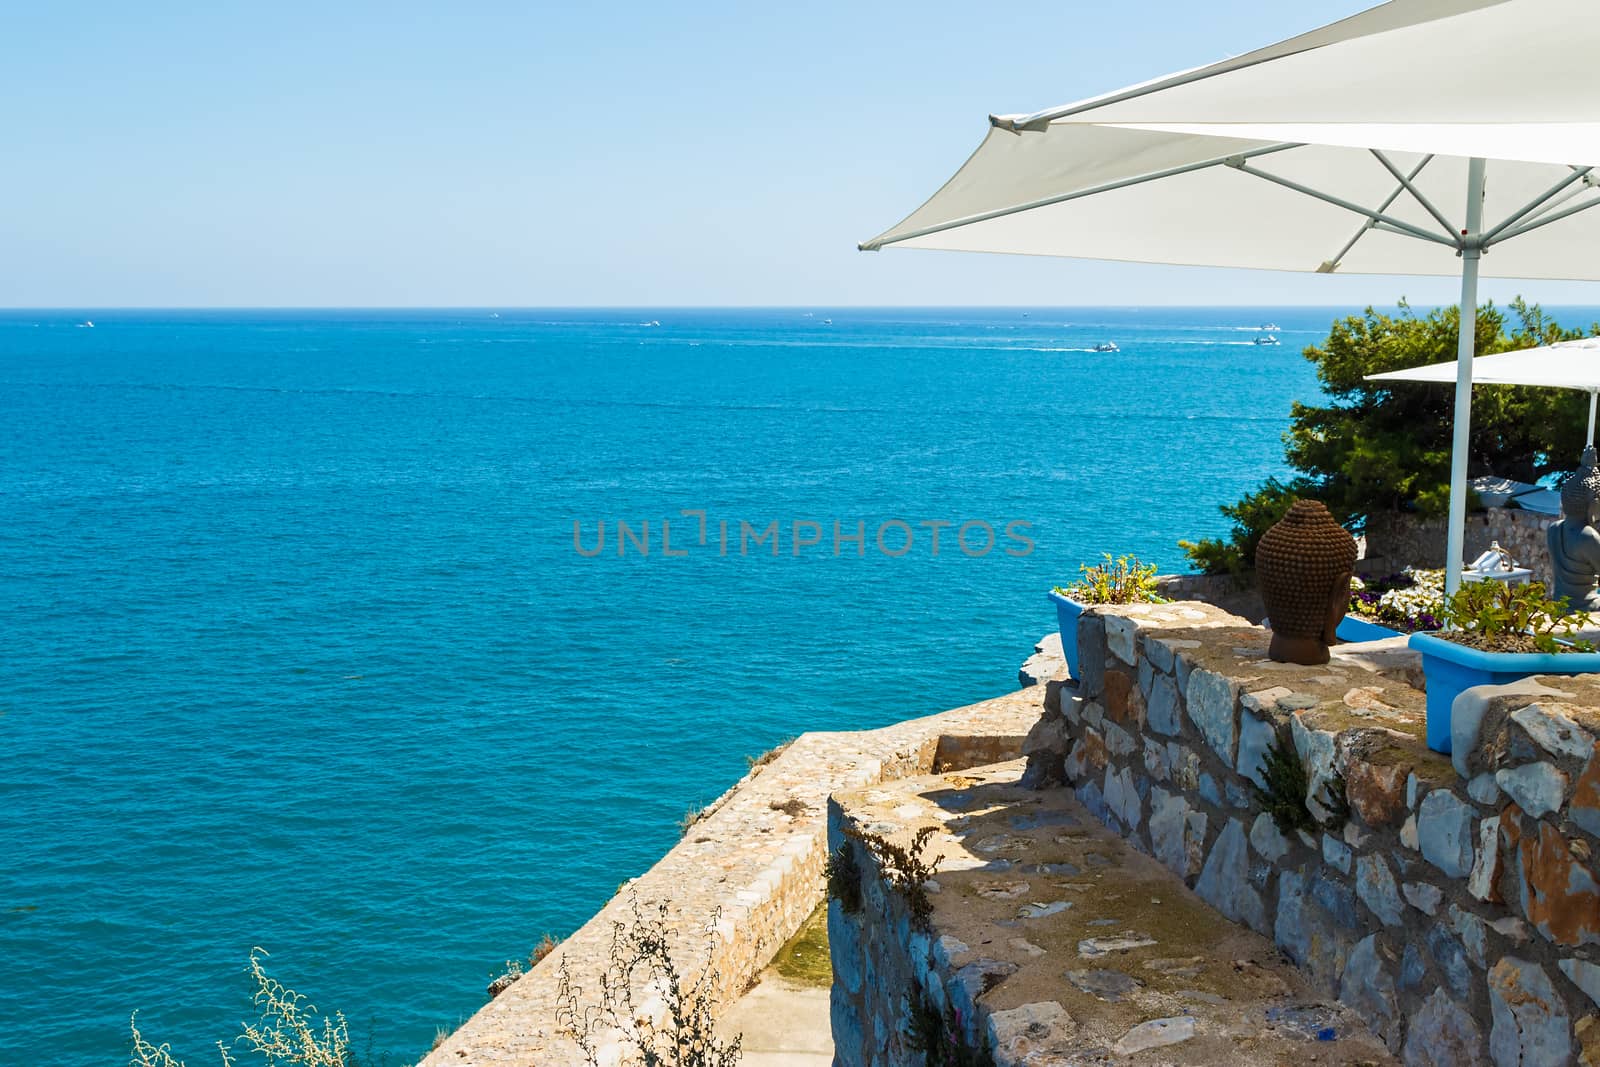 Restaurant with summer terrace and sea views. Horizontal image.